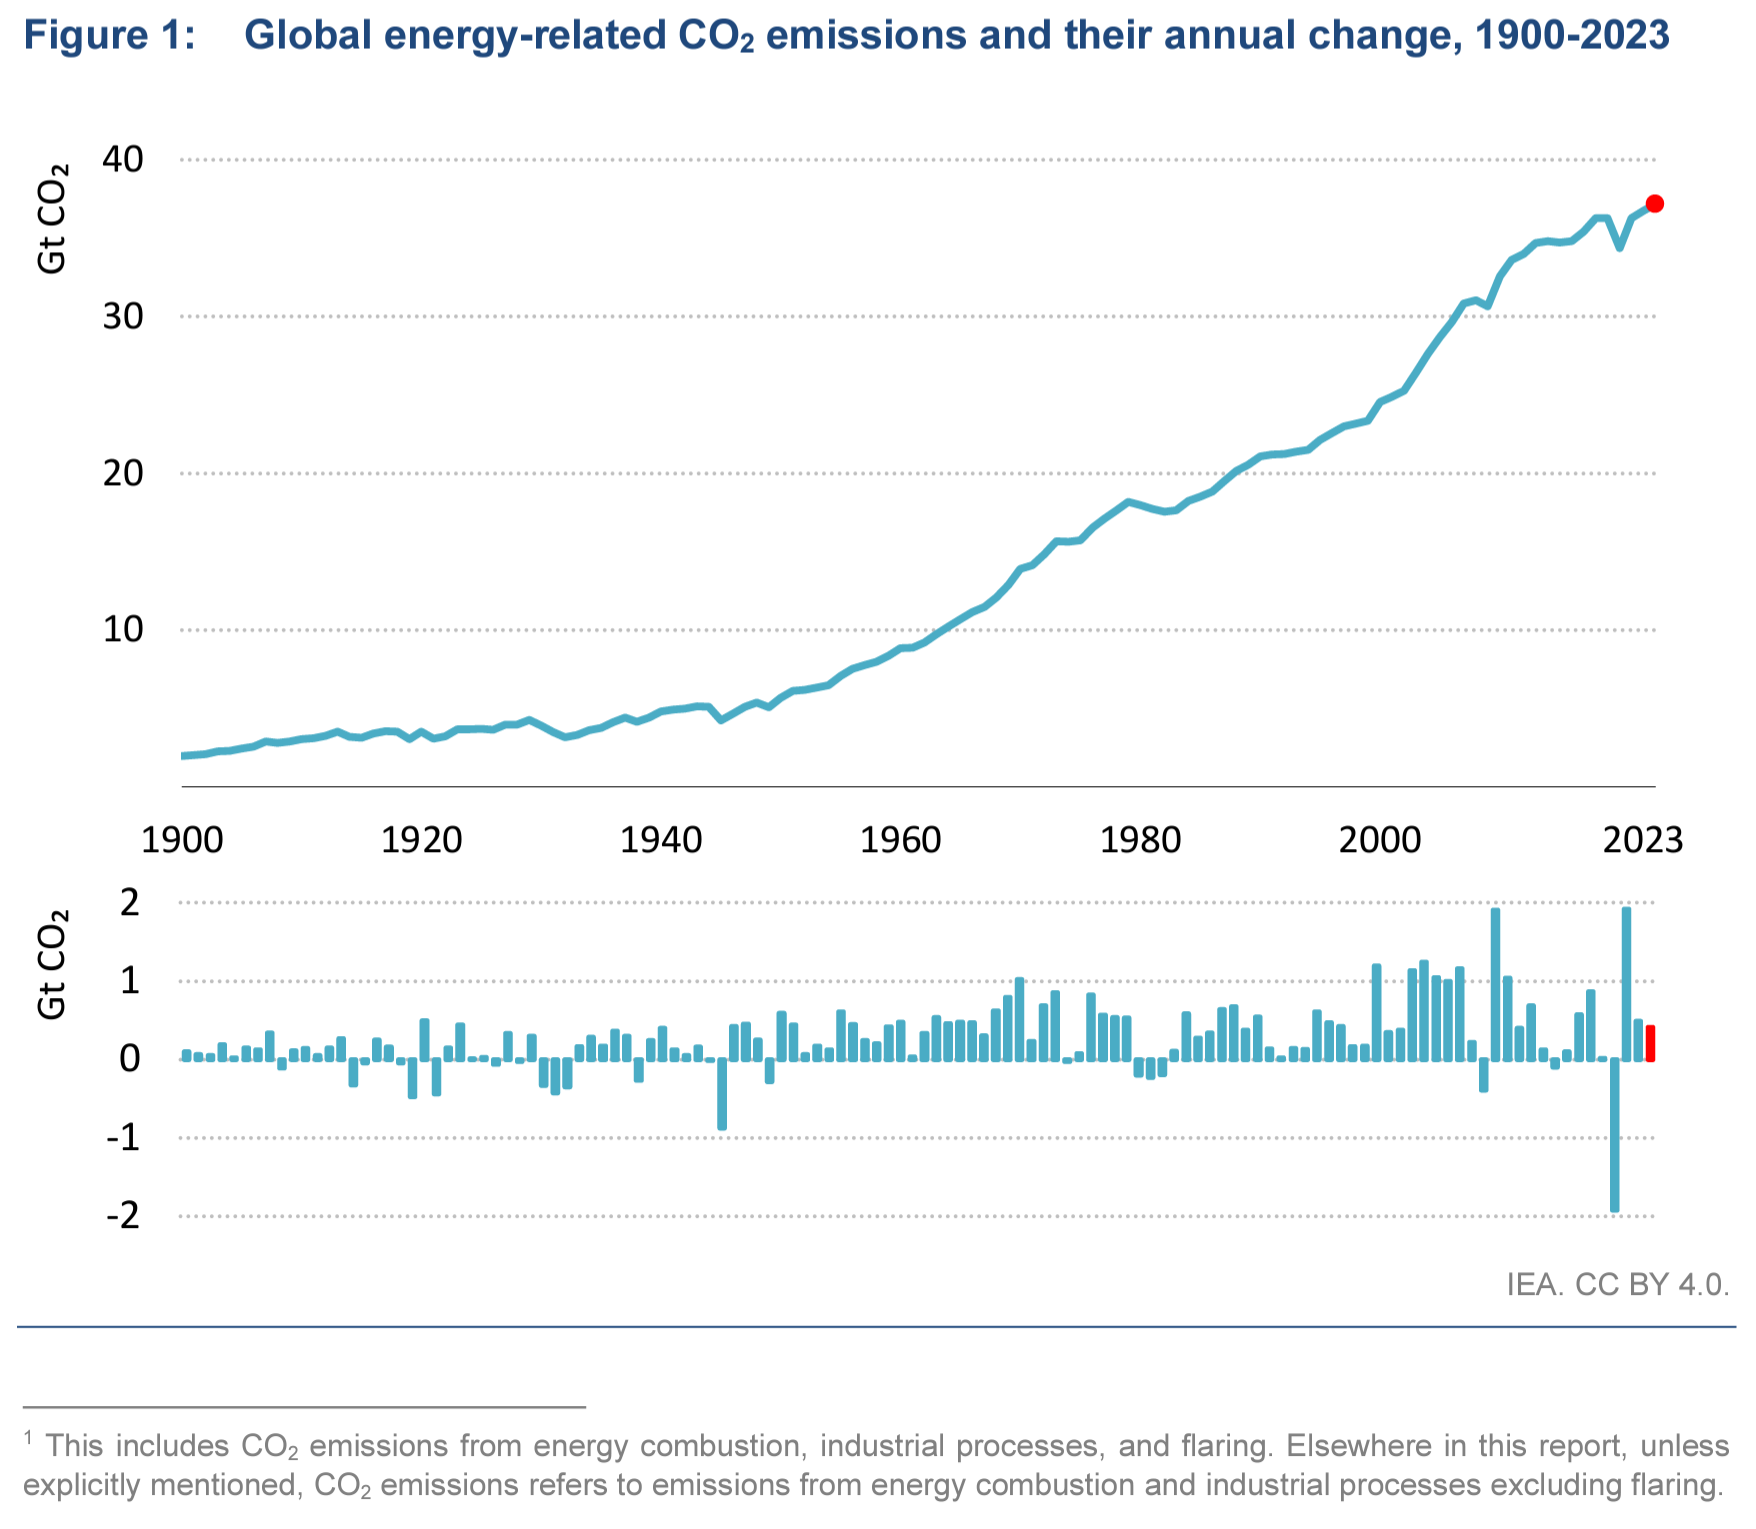 Global energy-related CO2 emissions and their annual change, 1900-2023. Total energy-related CO2 emissions increased by 1.1 percent in 2023. Far from falling rapidly – as is required to meet the global climate goals set out in the Paris Agreement – CO2 emissions reached a new record high of 37.4 Gt in 2023. This estimate is based on the IEA’s detailed, cutting-edge region-by-region and fuel-by-fuel analysis of the latest official national energy data, supplemented by data on economic and weather conditions. Graphic: IEA